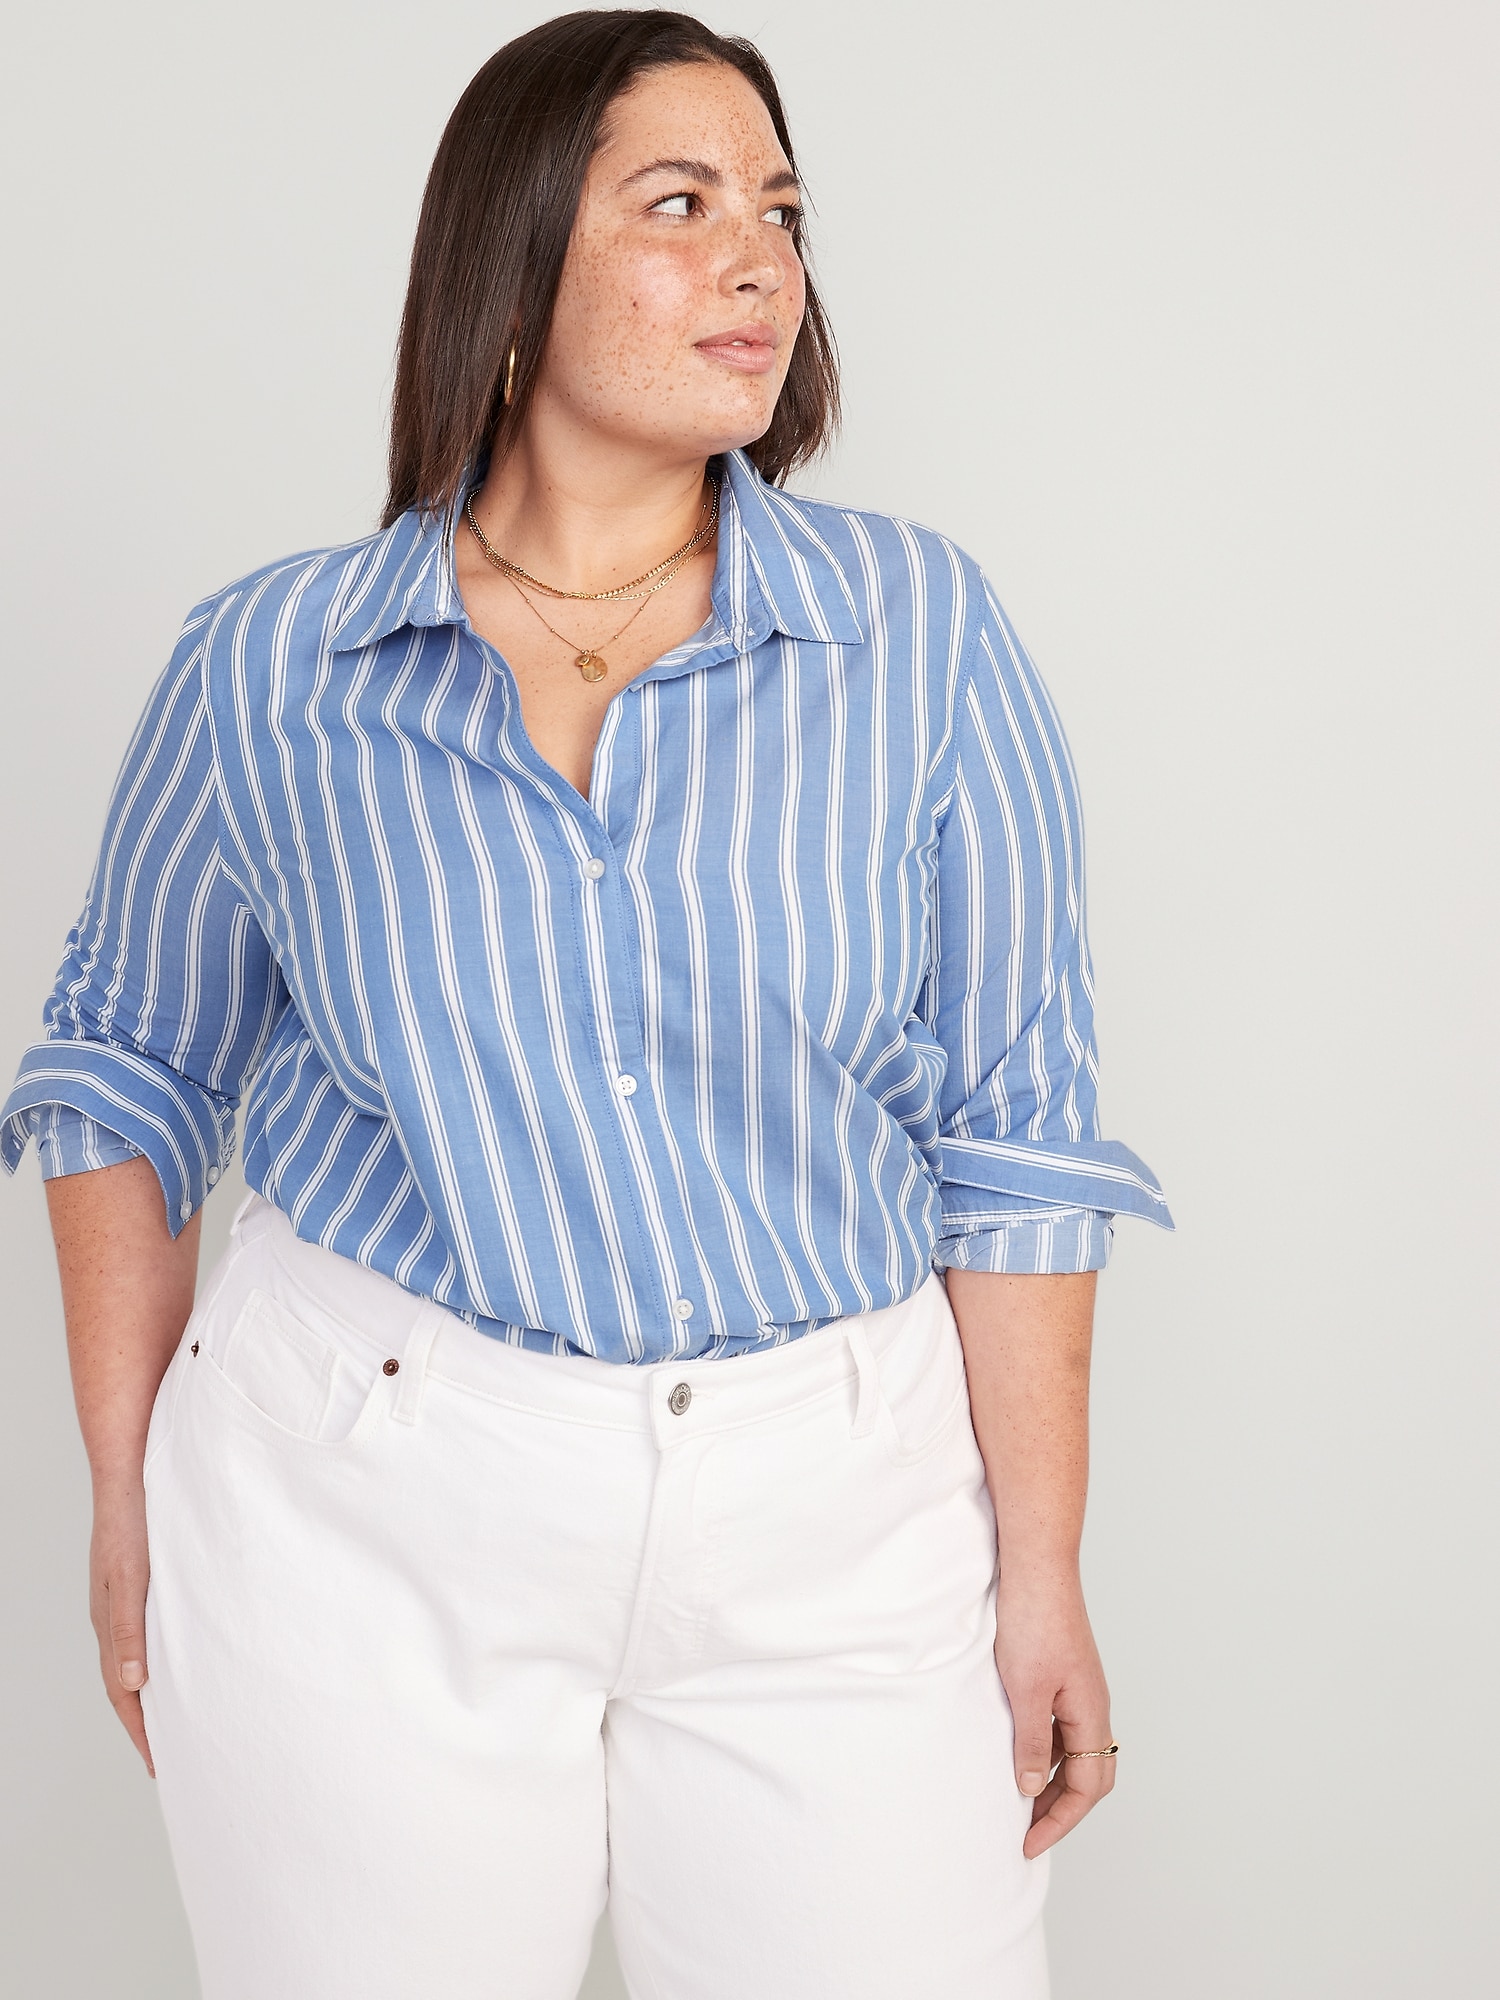 Striped Classic Button-Down Shirt | Old Navy